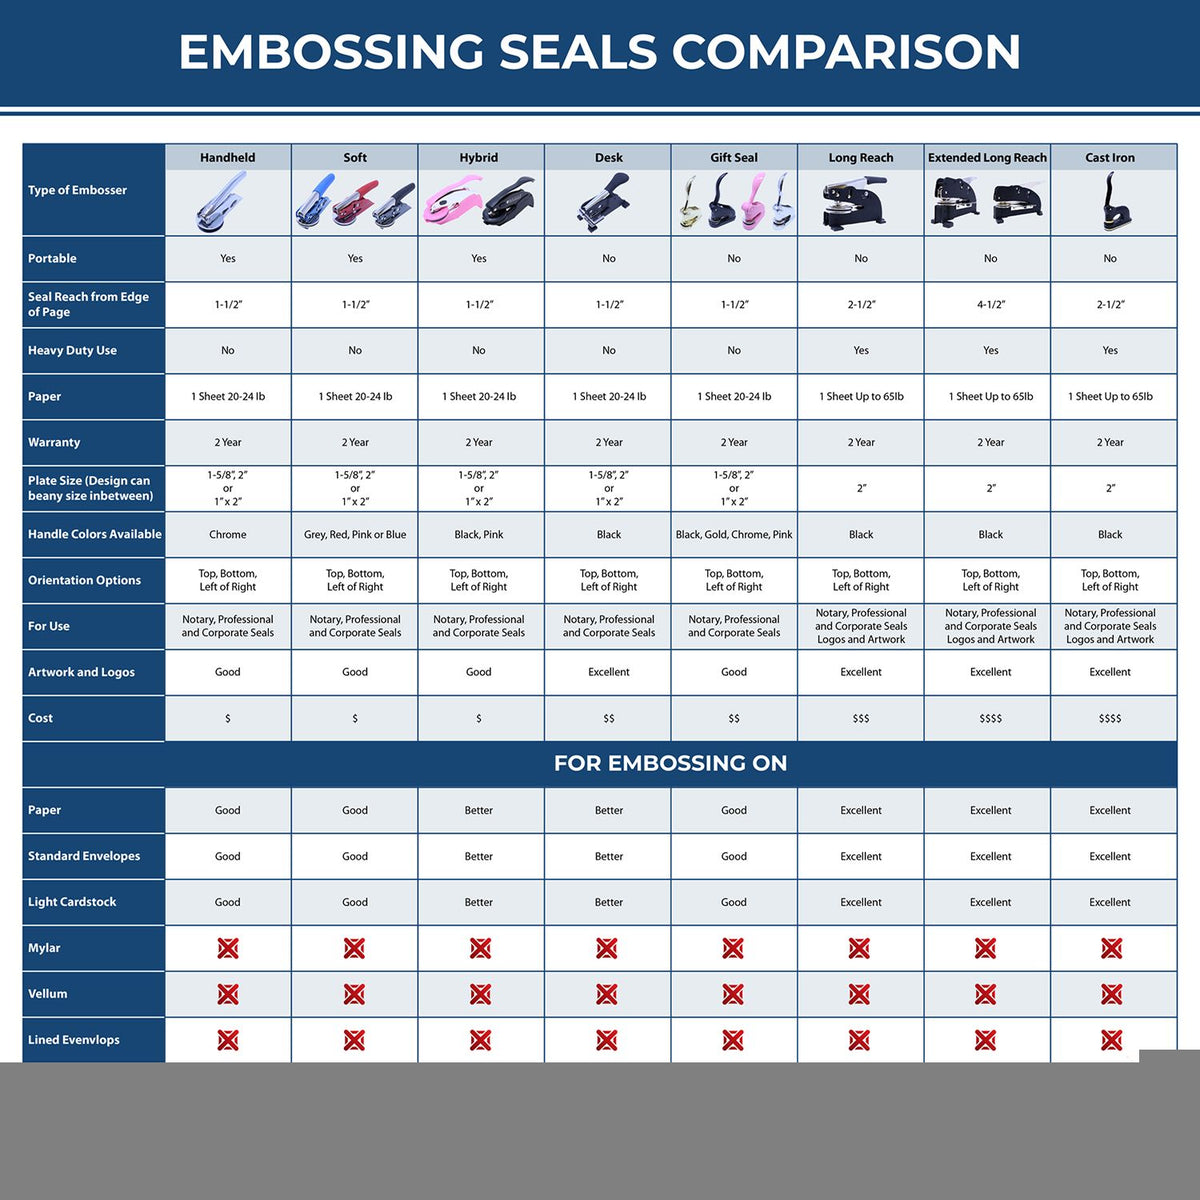 Professional Engineer Pink Soft Seal Embosser 3036ENG Embossing Seal Comparison